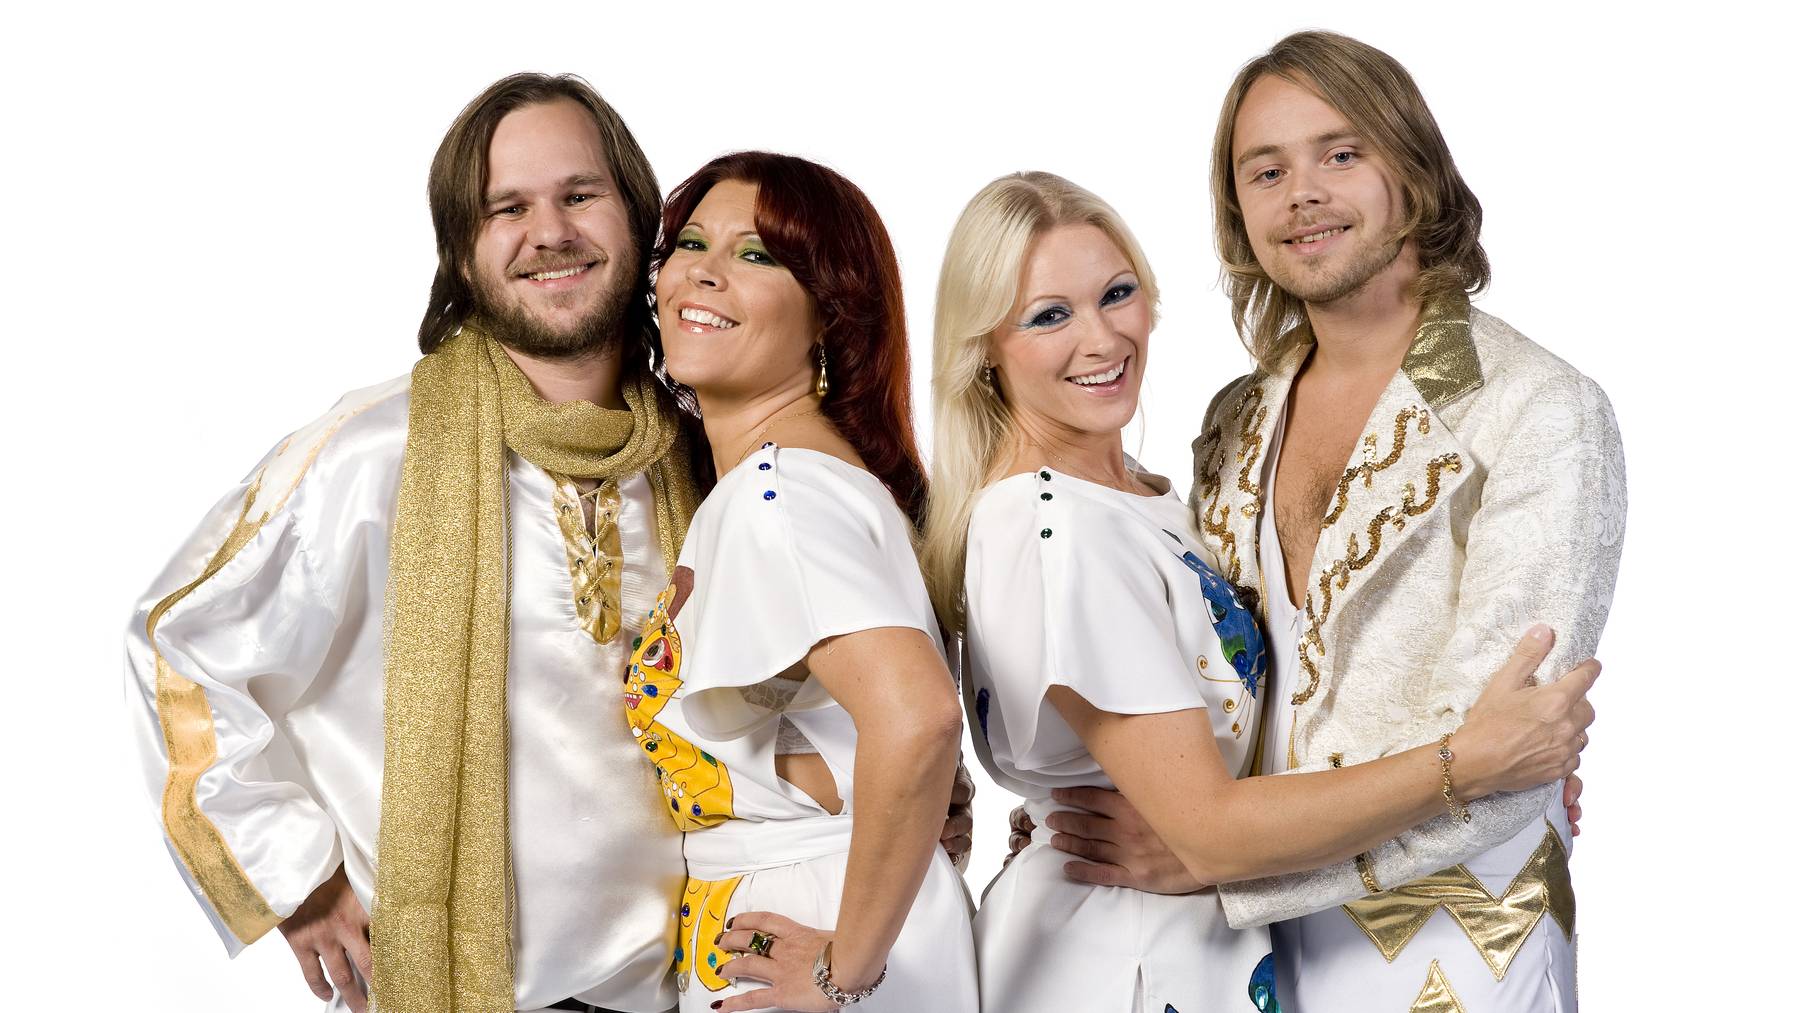 The Show – A Tribute to ABBA